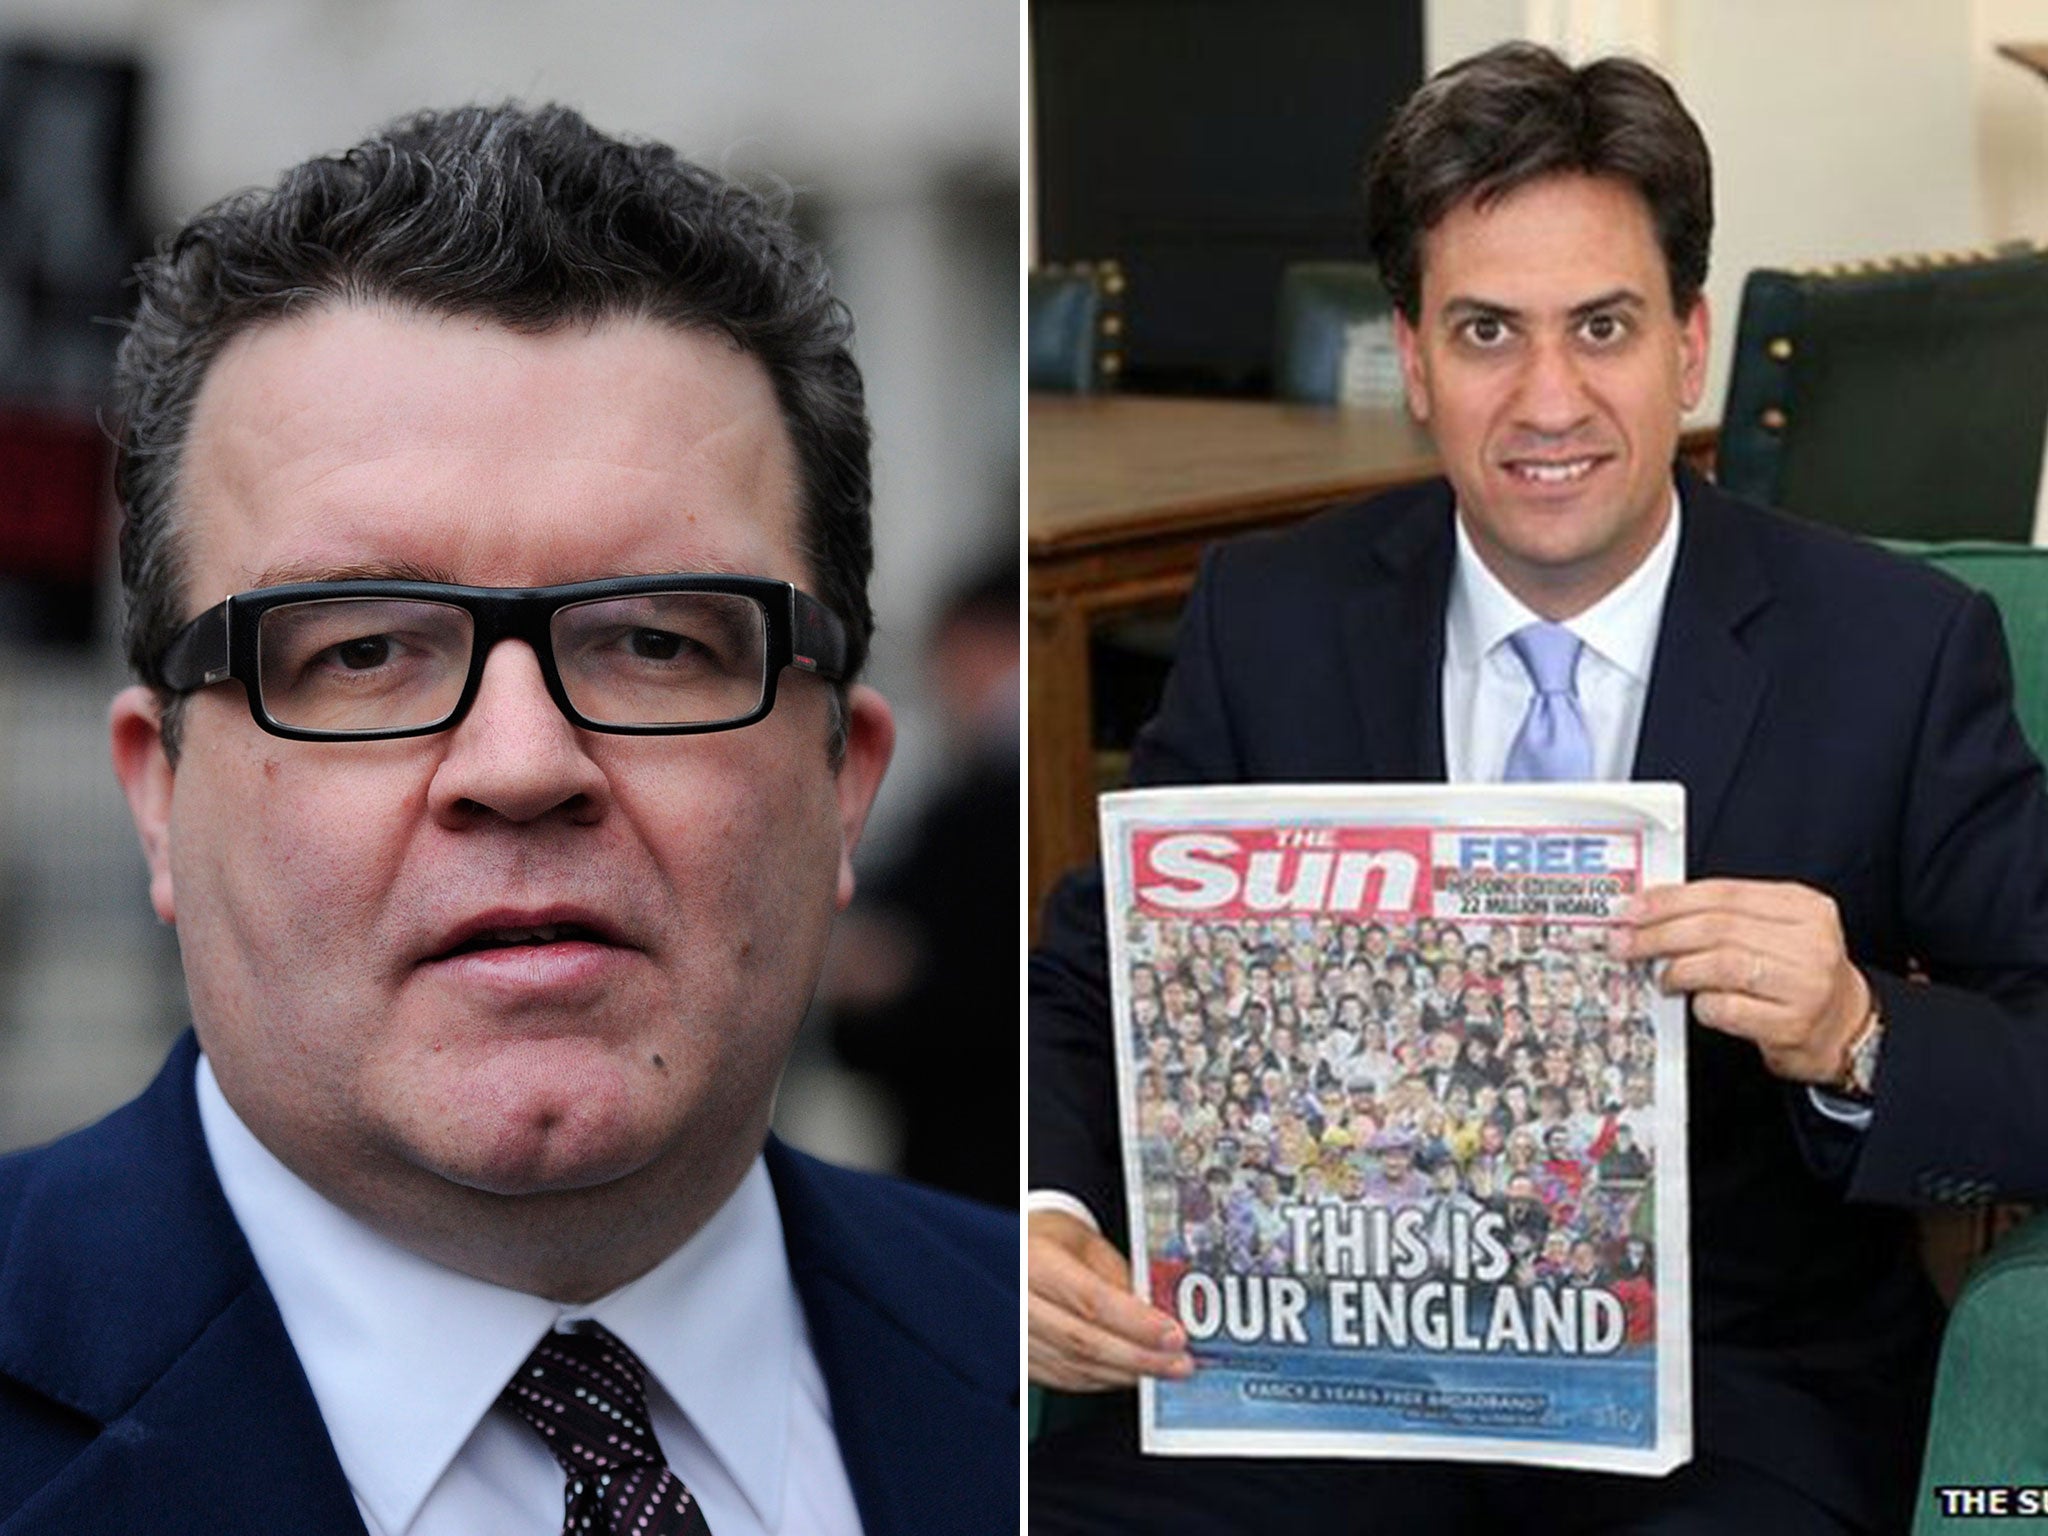 Tom Watson was outspoken in his criticism of Mr Miliband’s decision to pose with a copy of the Sun